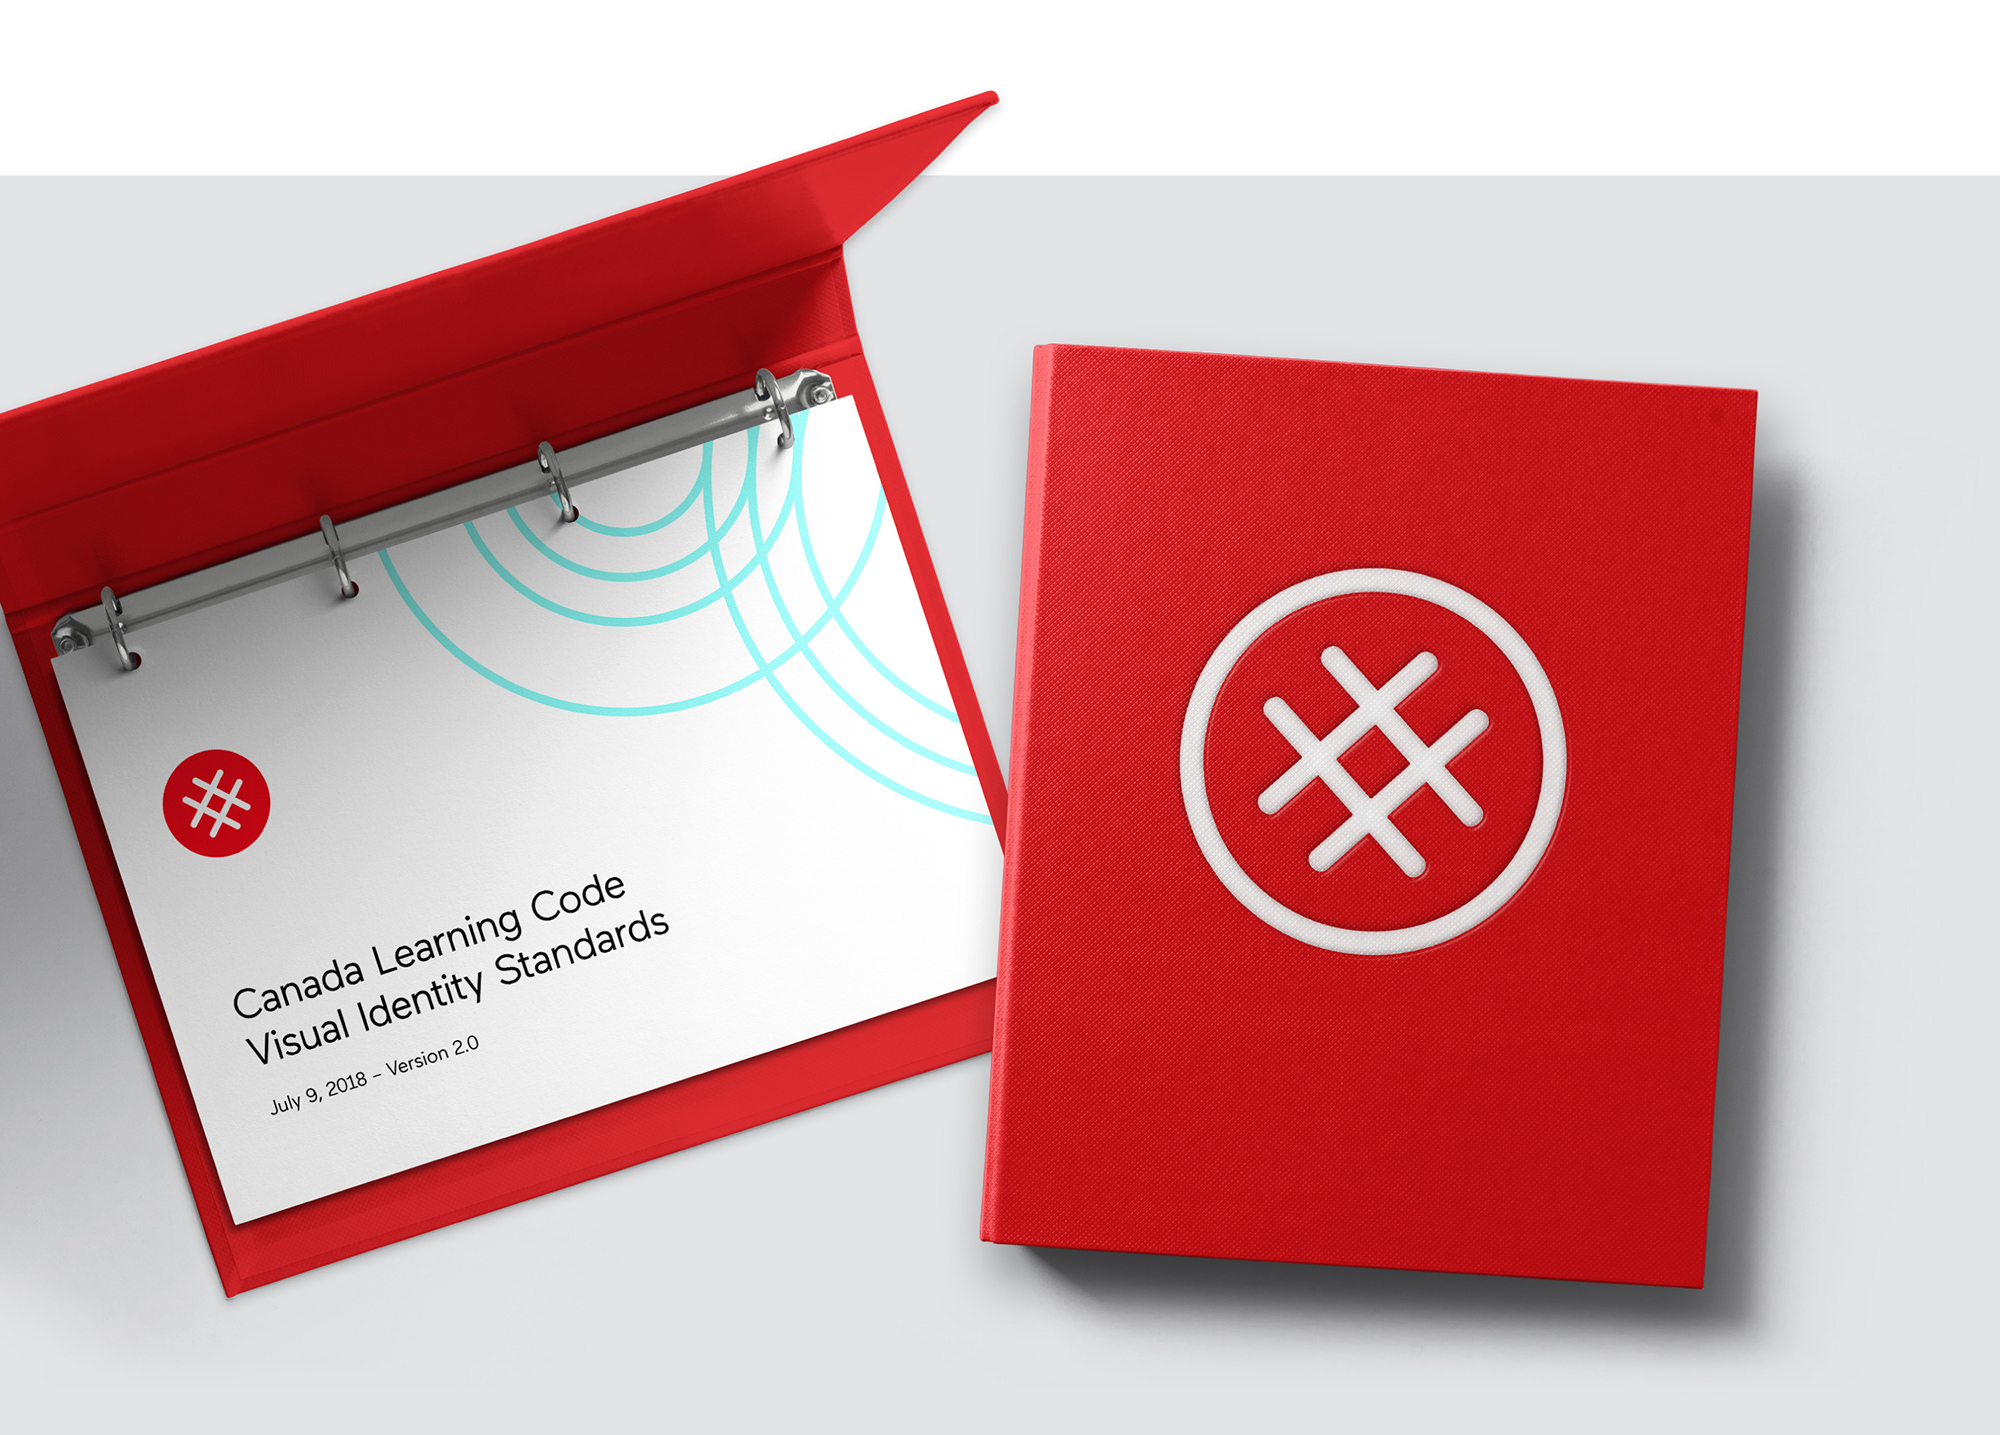 The cover and binder design for Canada Learning Code’s visual identity standards guide